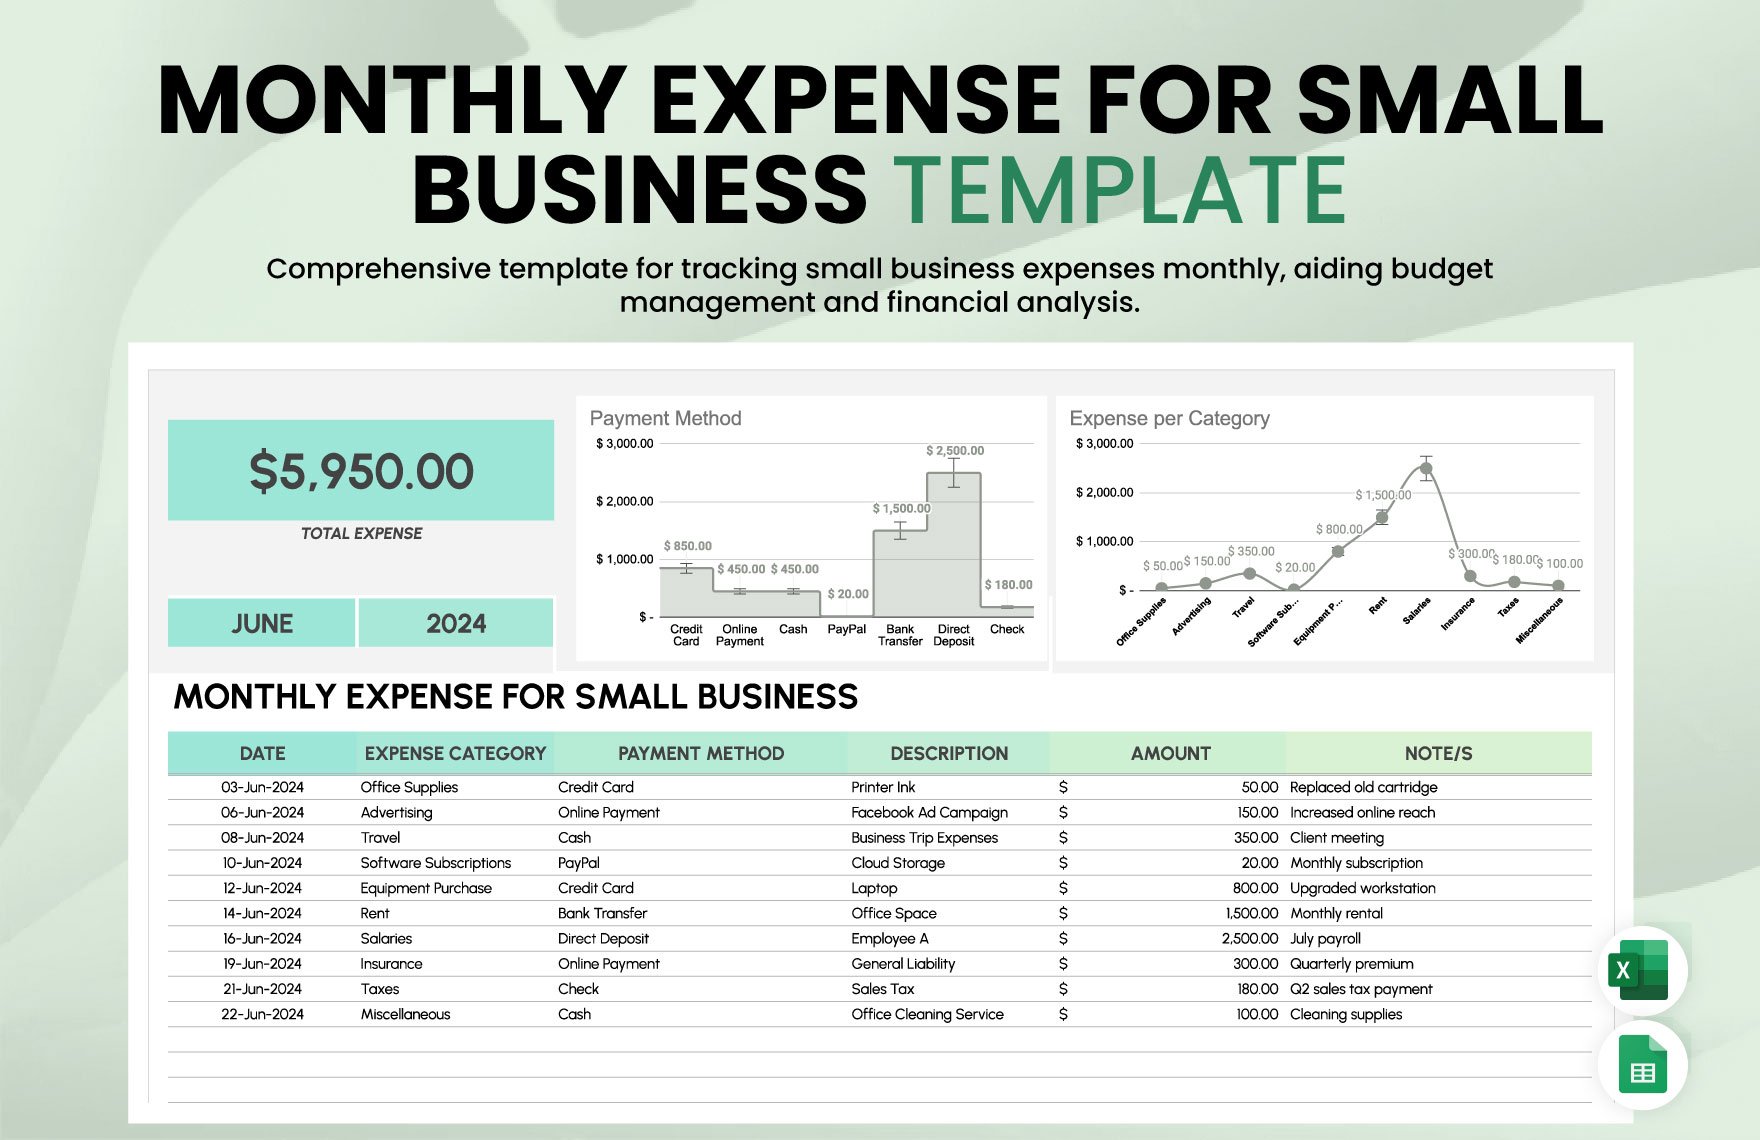 Monthly Expense for Small Business Template in Excel, Google Sheets